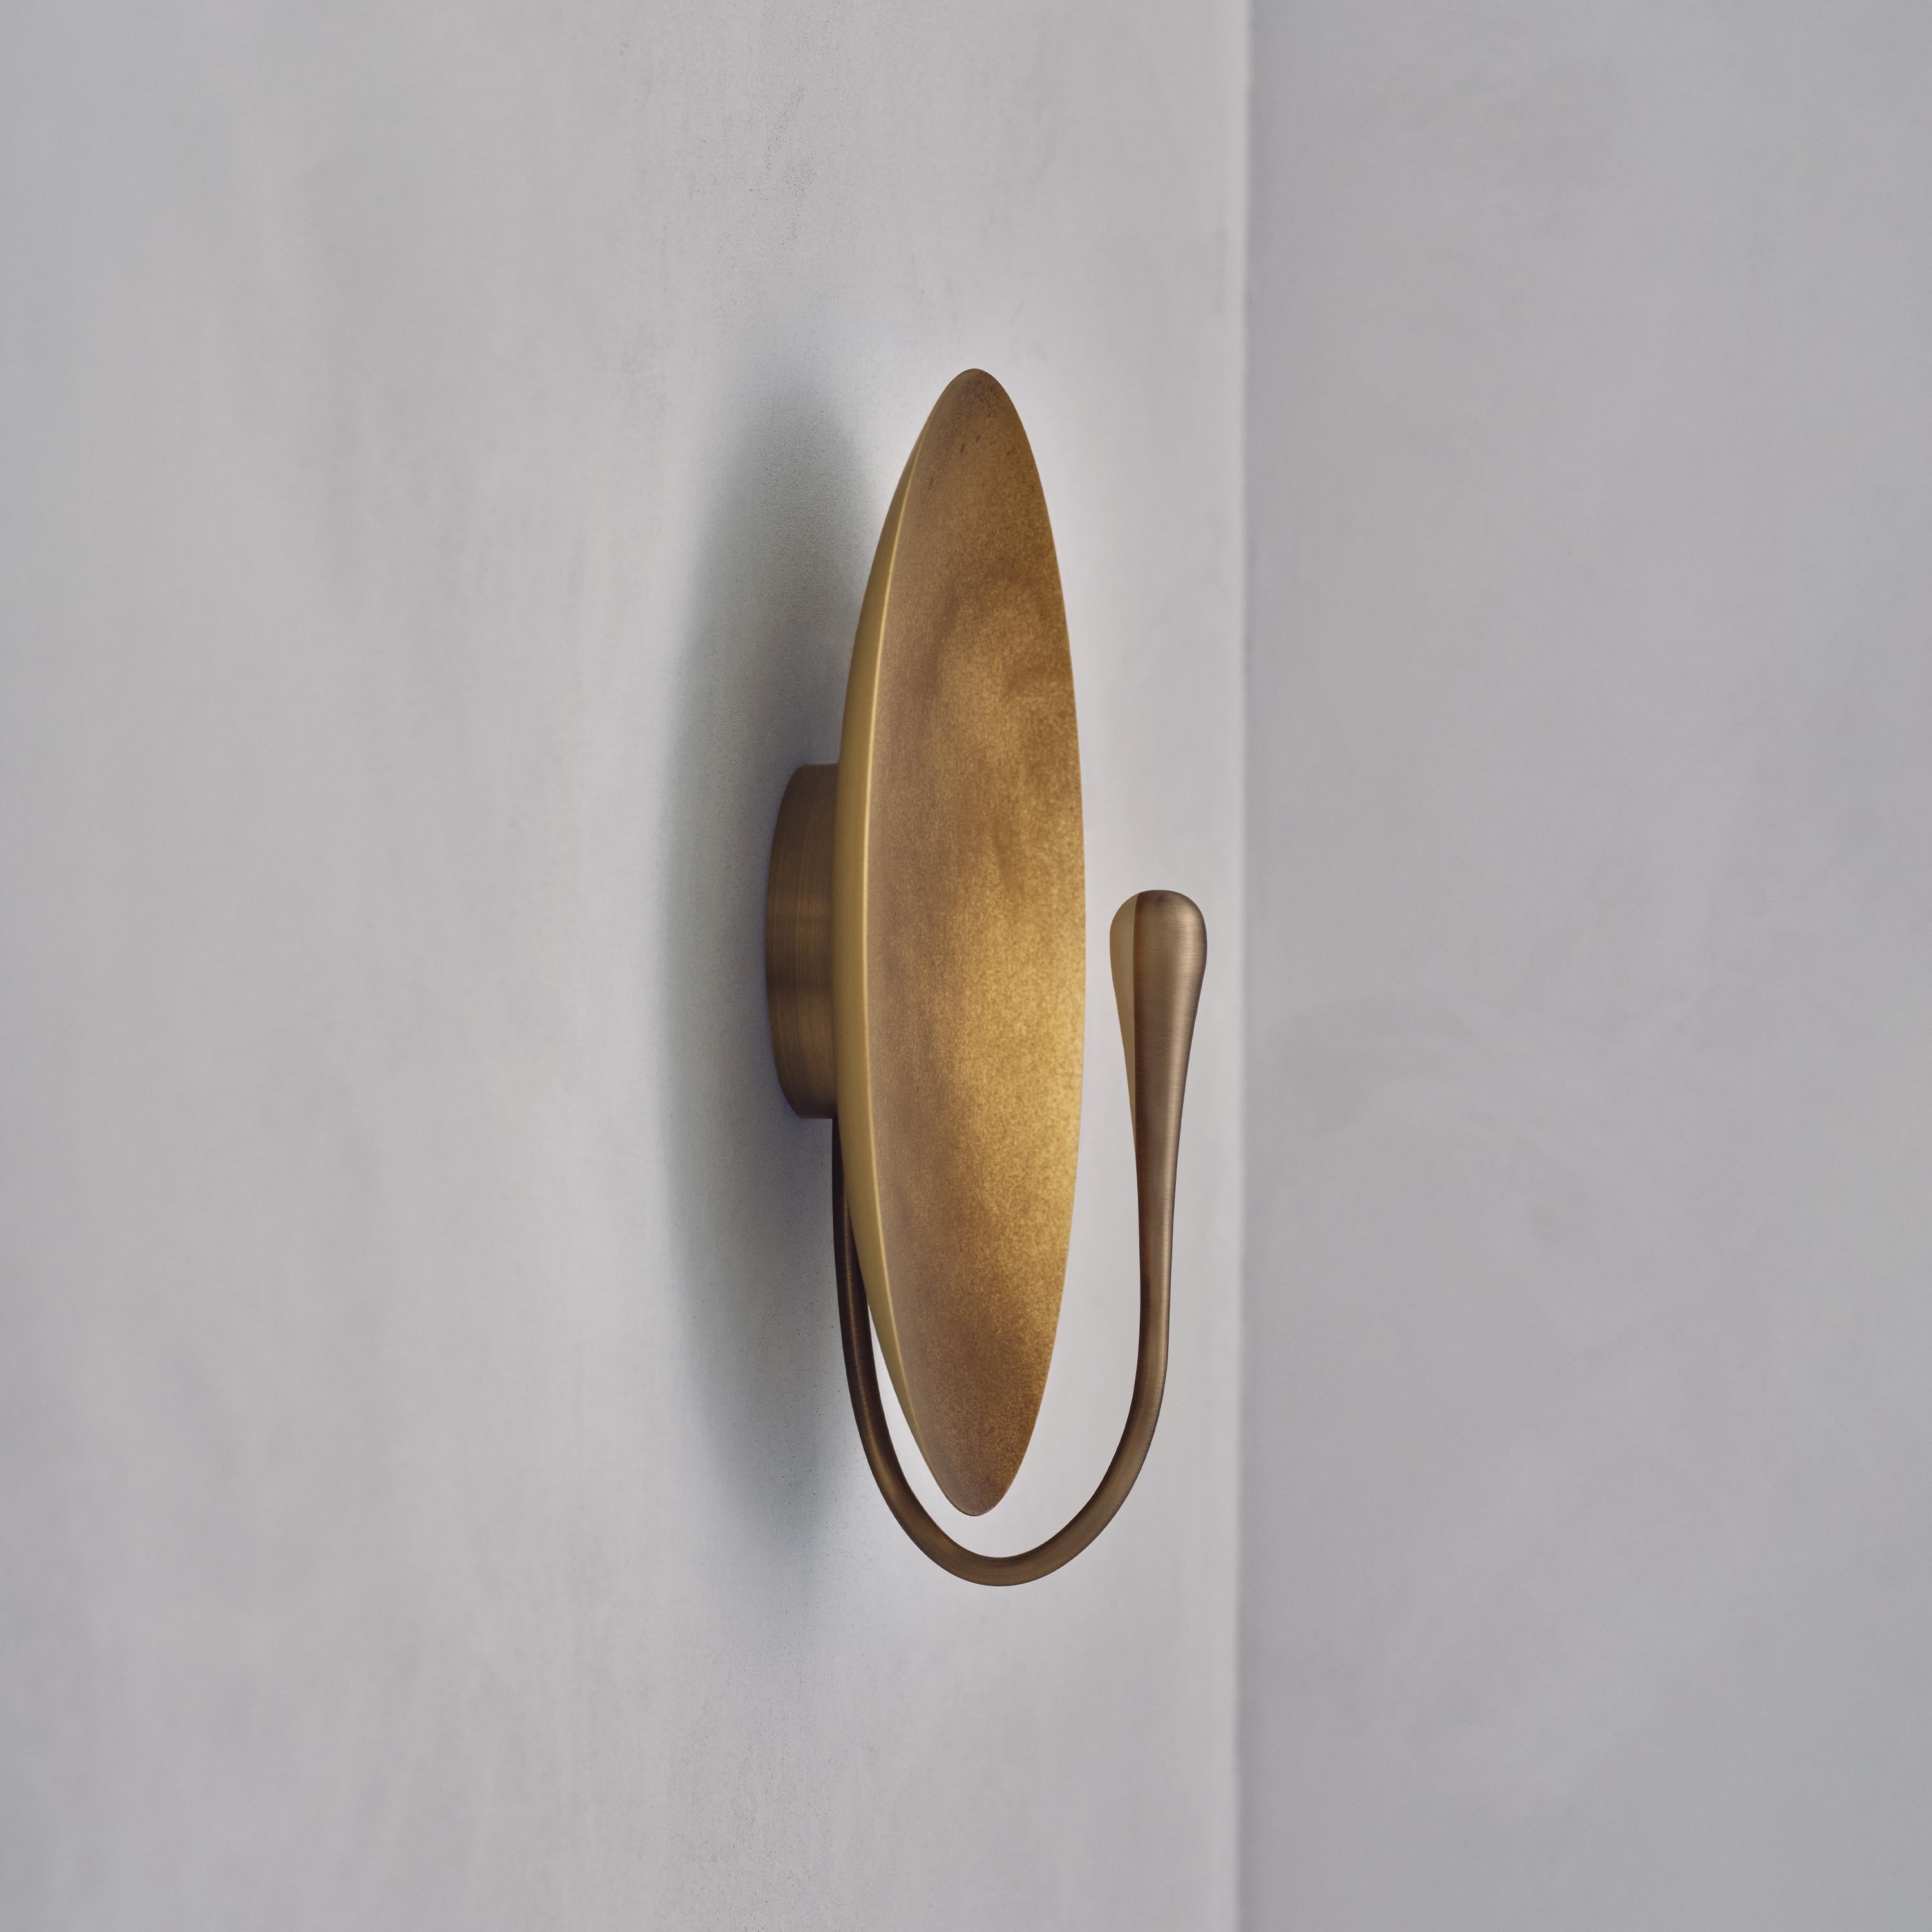 British 'Cosmic Oxidium' Mixed Color Brass Patina Contemporary Wall Light, Sconce For Sale